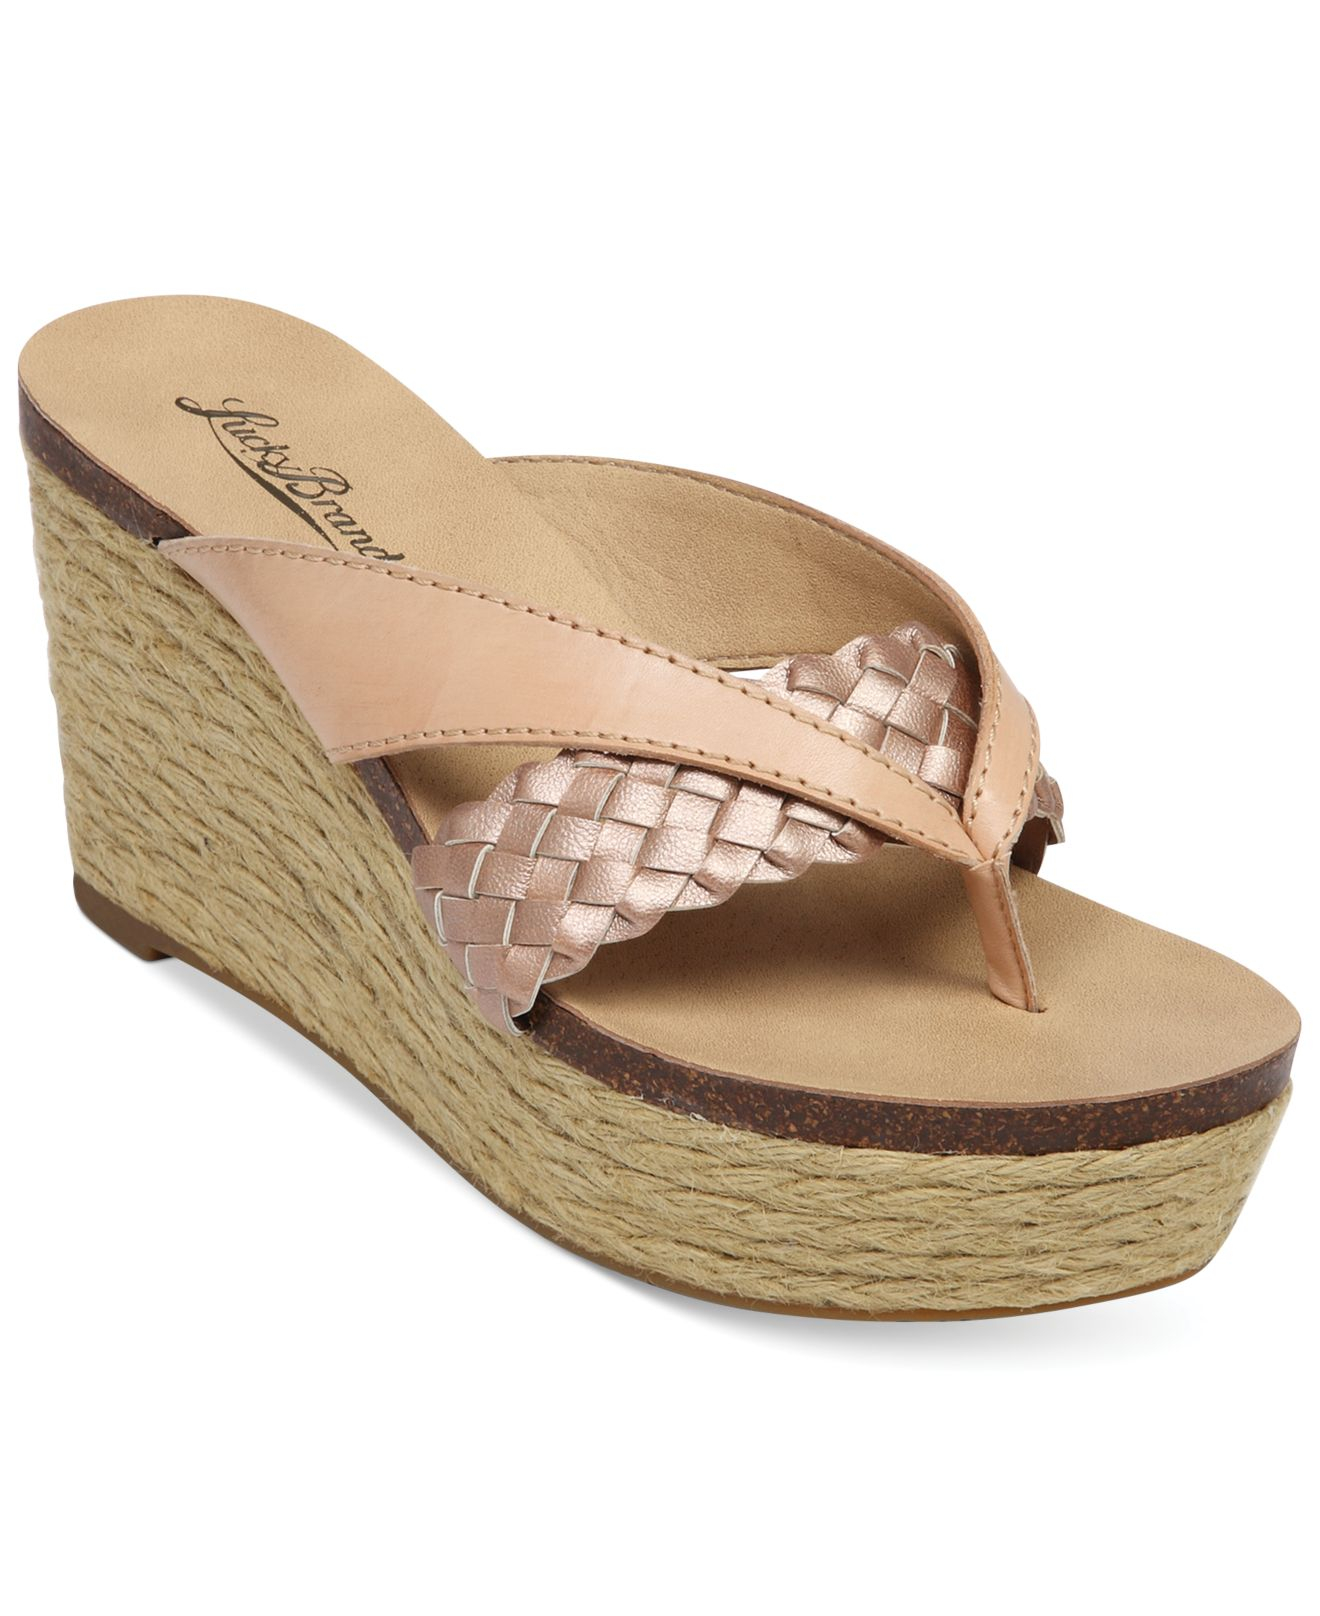 Lucky brand Women'S Norrah Platform Wedge Thong Sandals in Natural | Lyst